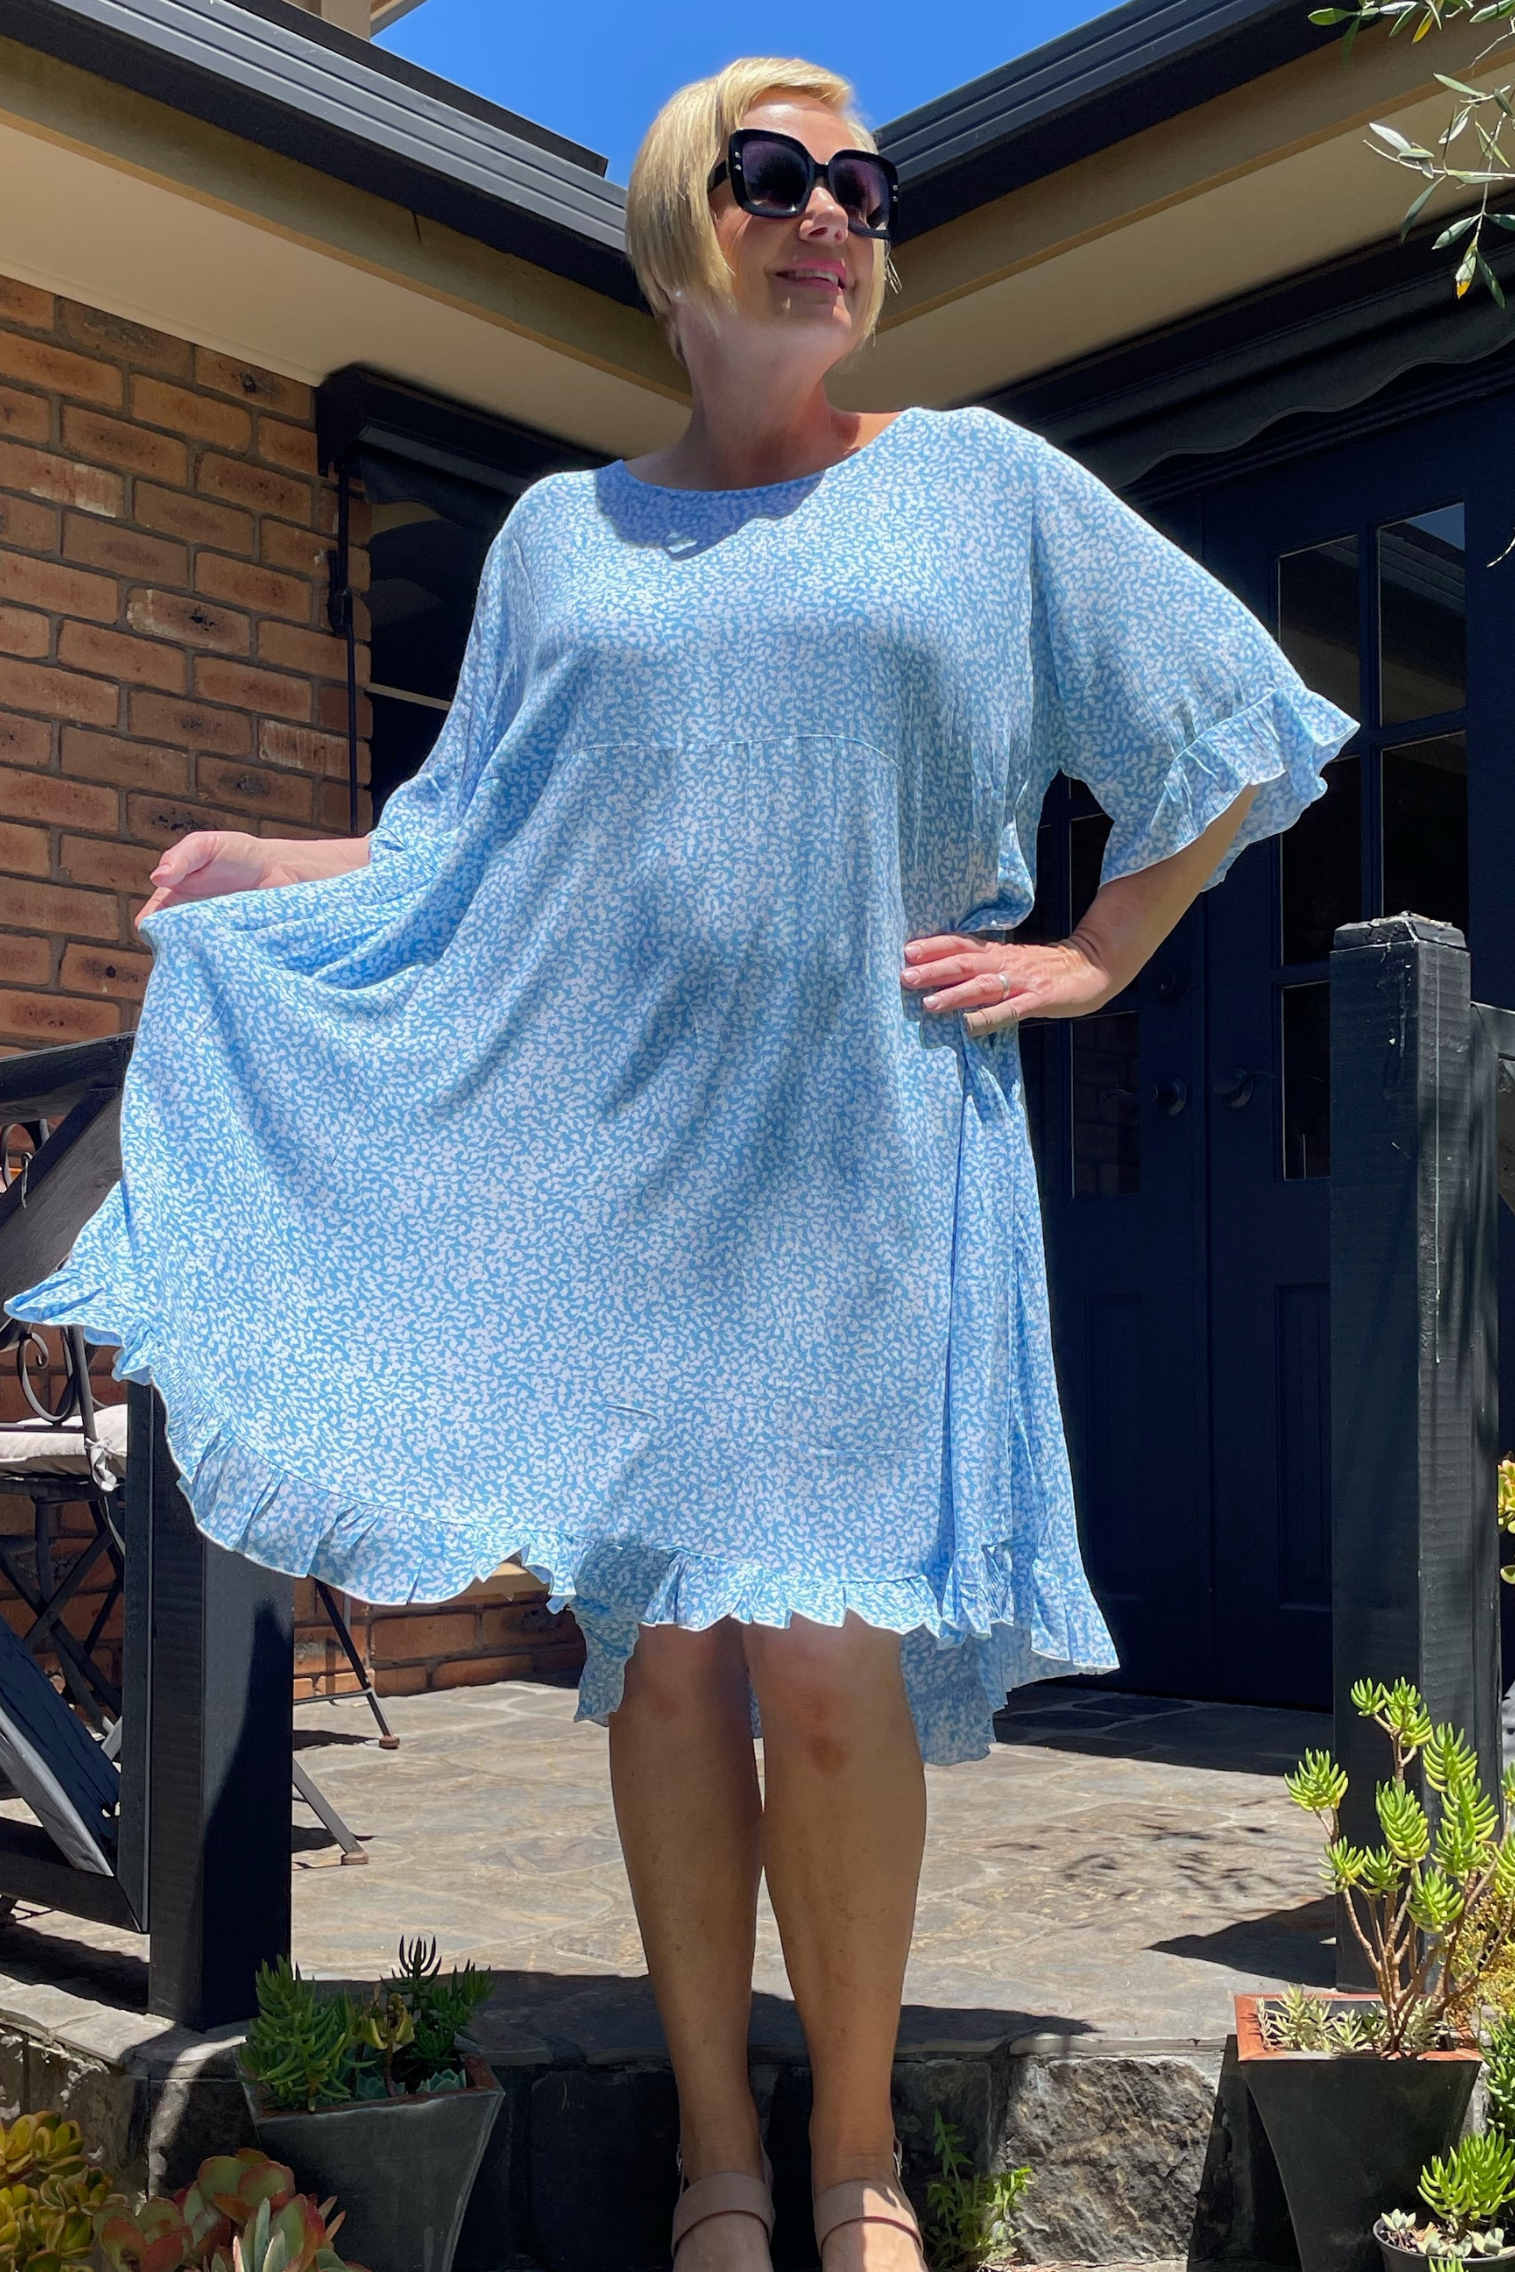 Kita Ku plus size dress Leonie in a pretty soft blue and white holly print, set in a sunny garden.